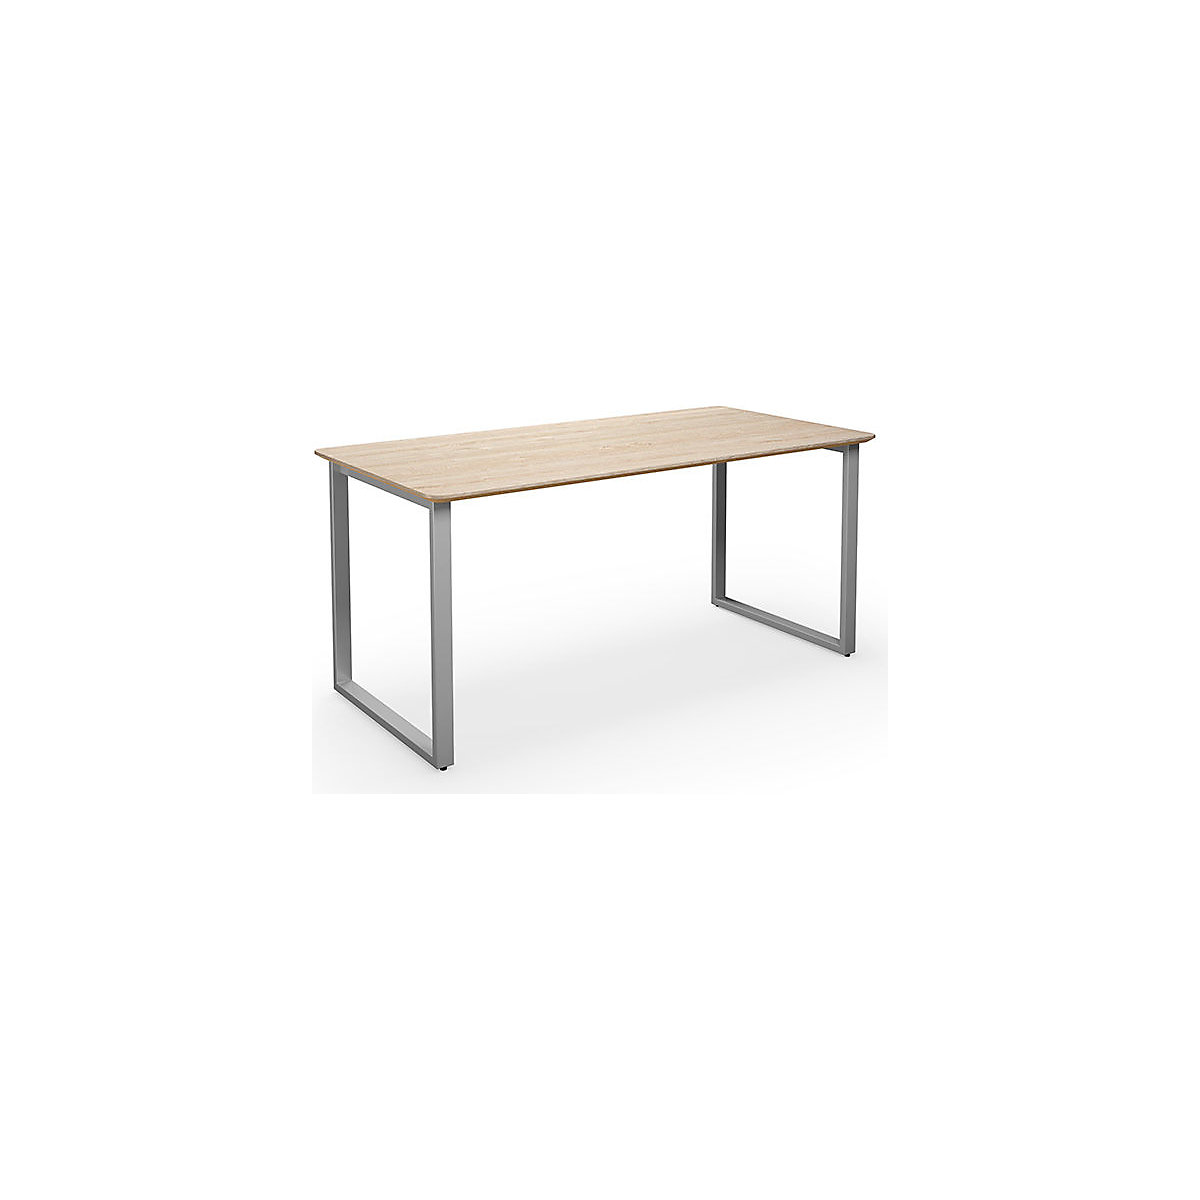 DUO-O Trend multi-purpose desk, straight tabletop, rounded corners